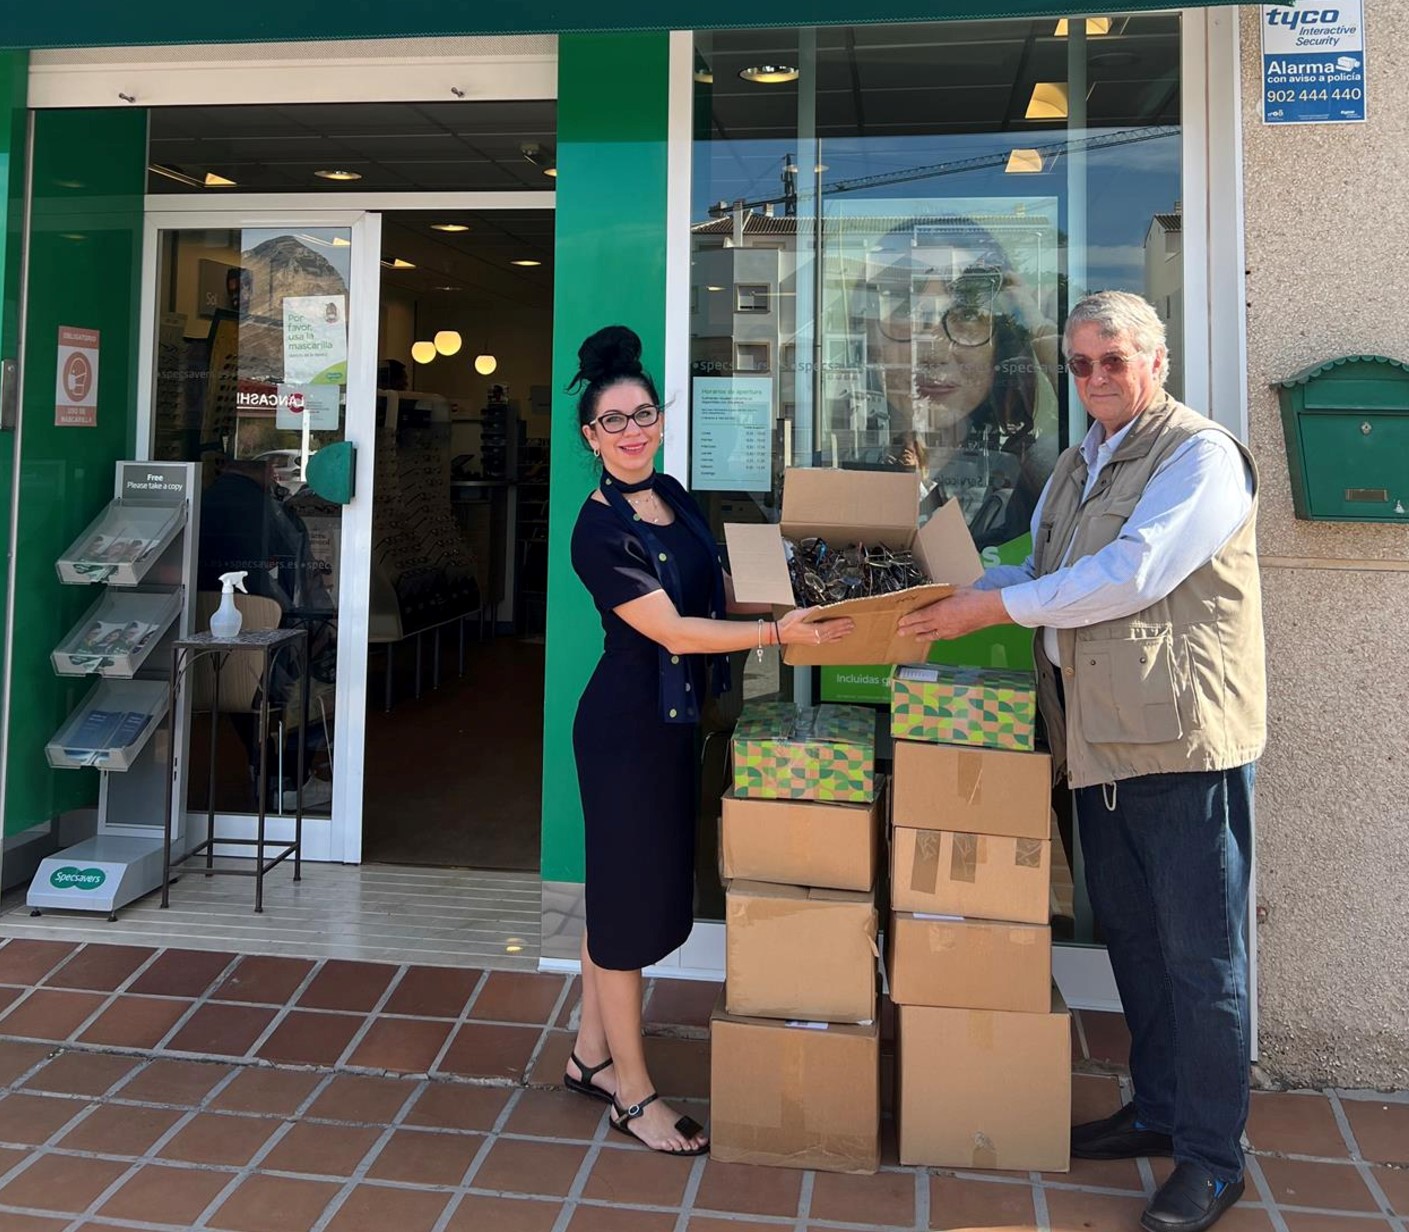 Specsavers in Javea on Spain’s Costa Blanca donates over 1,500 pairs of glasses to Lions International
– News X